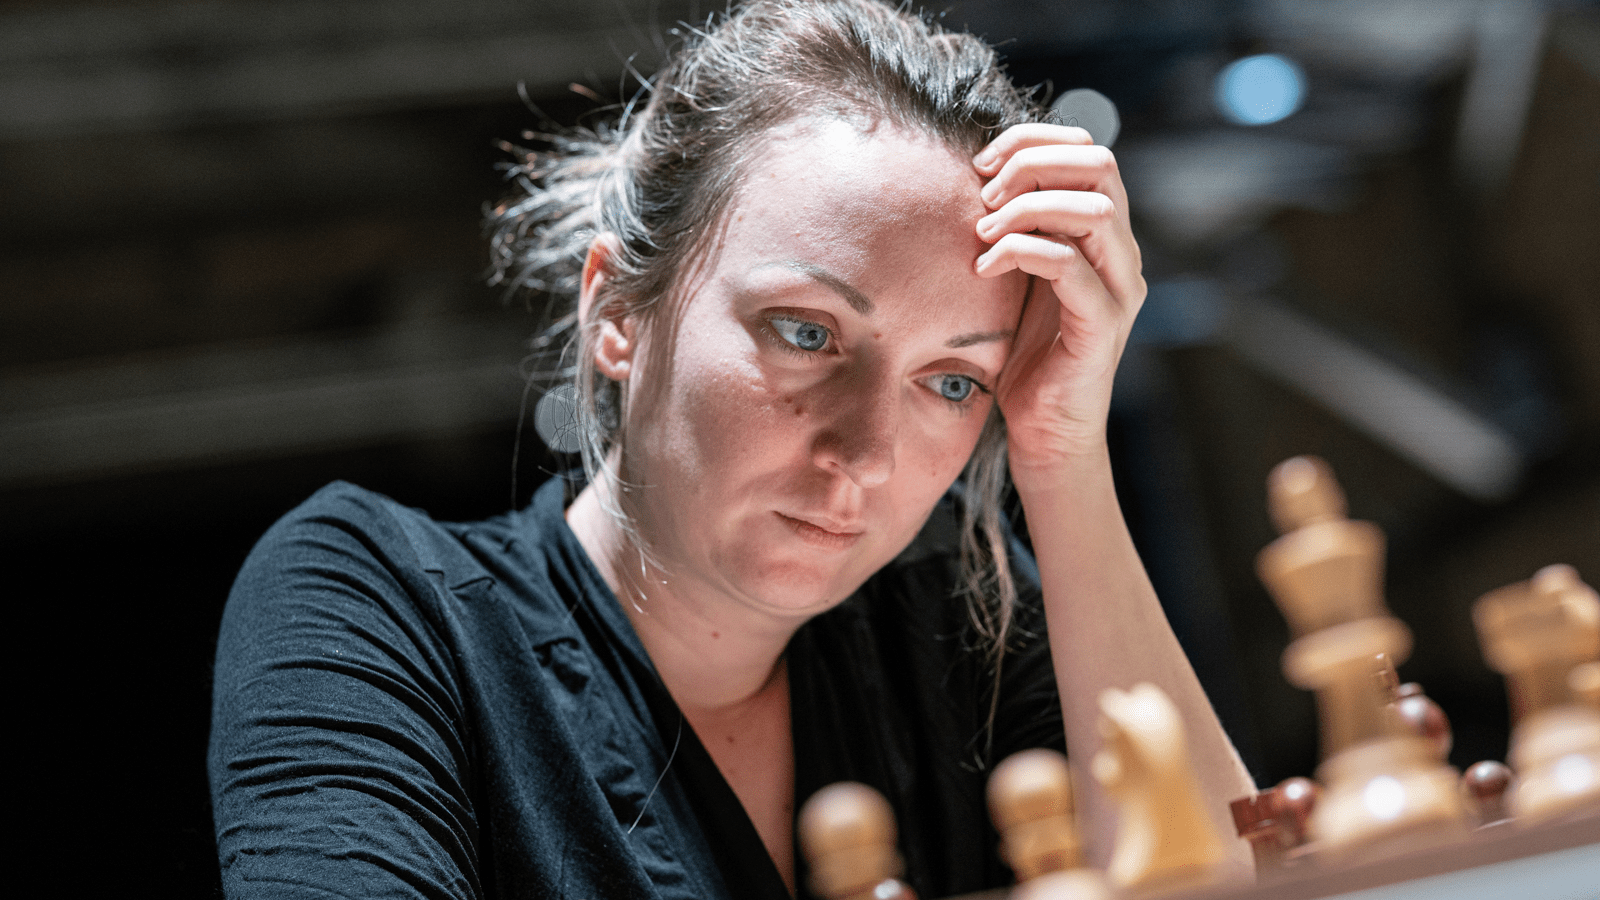 Anna Cramling reveals what would she do if she wasn't a chess